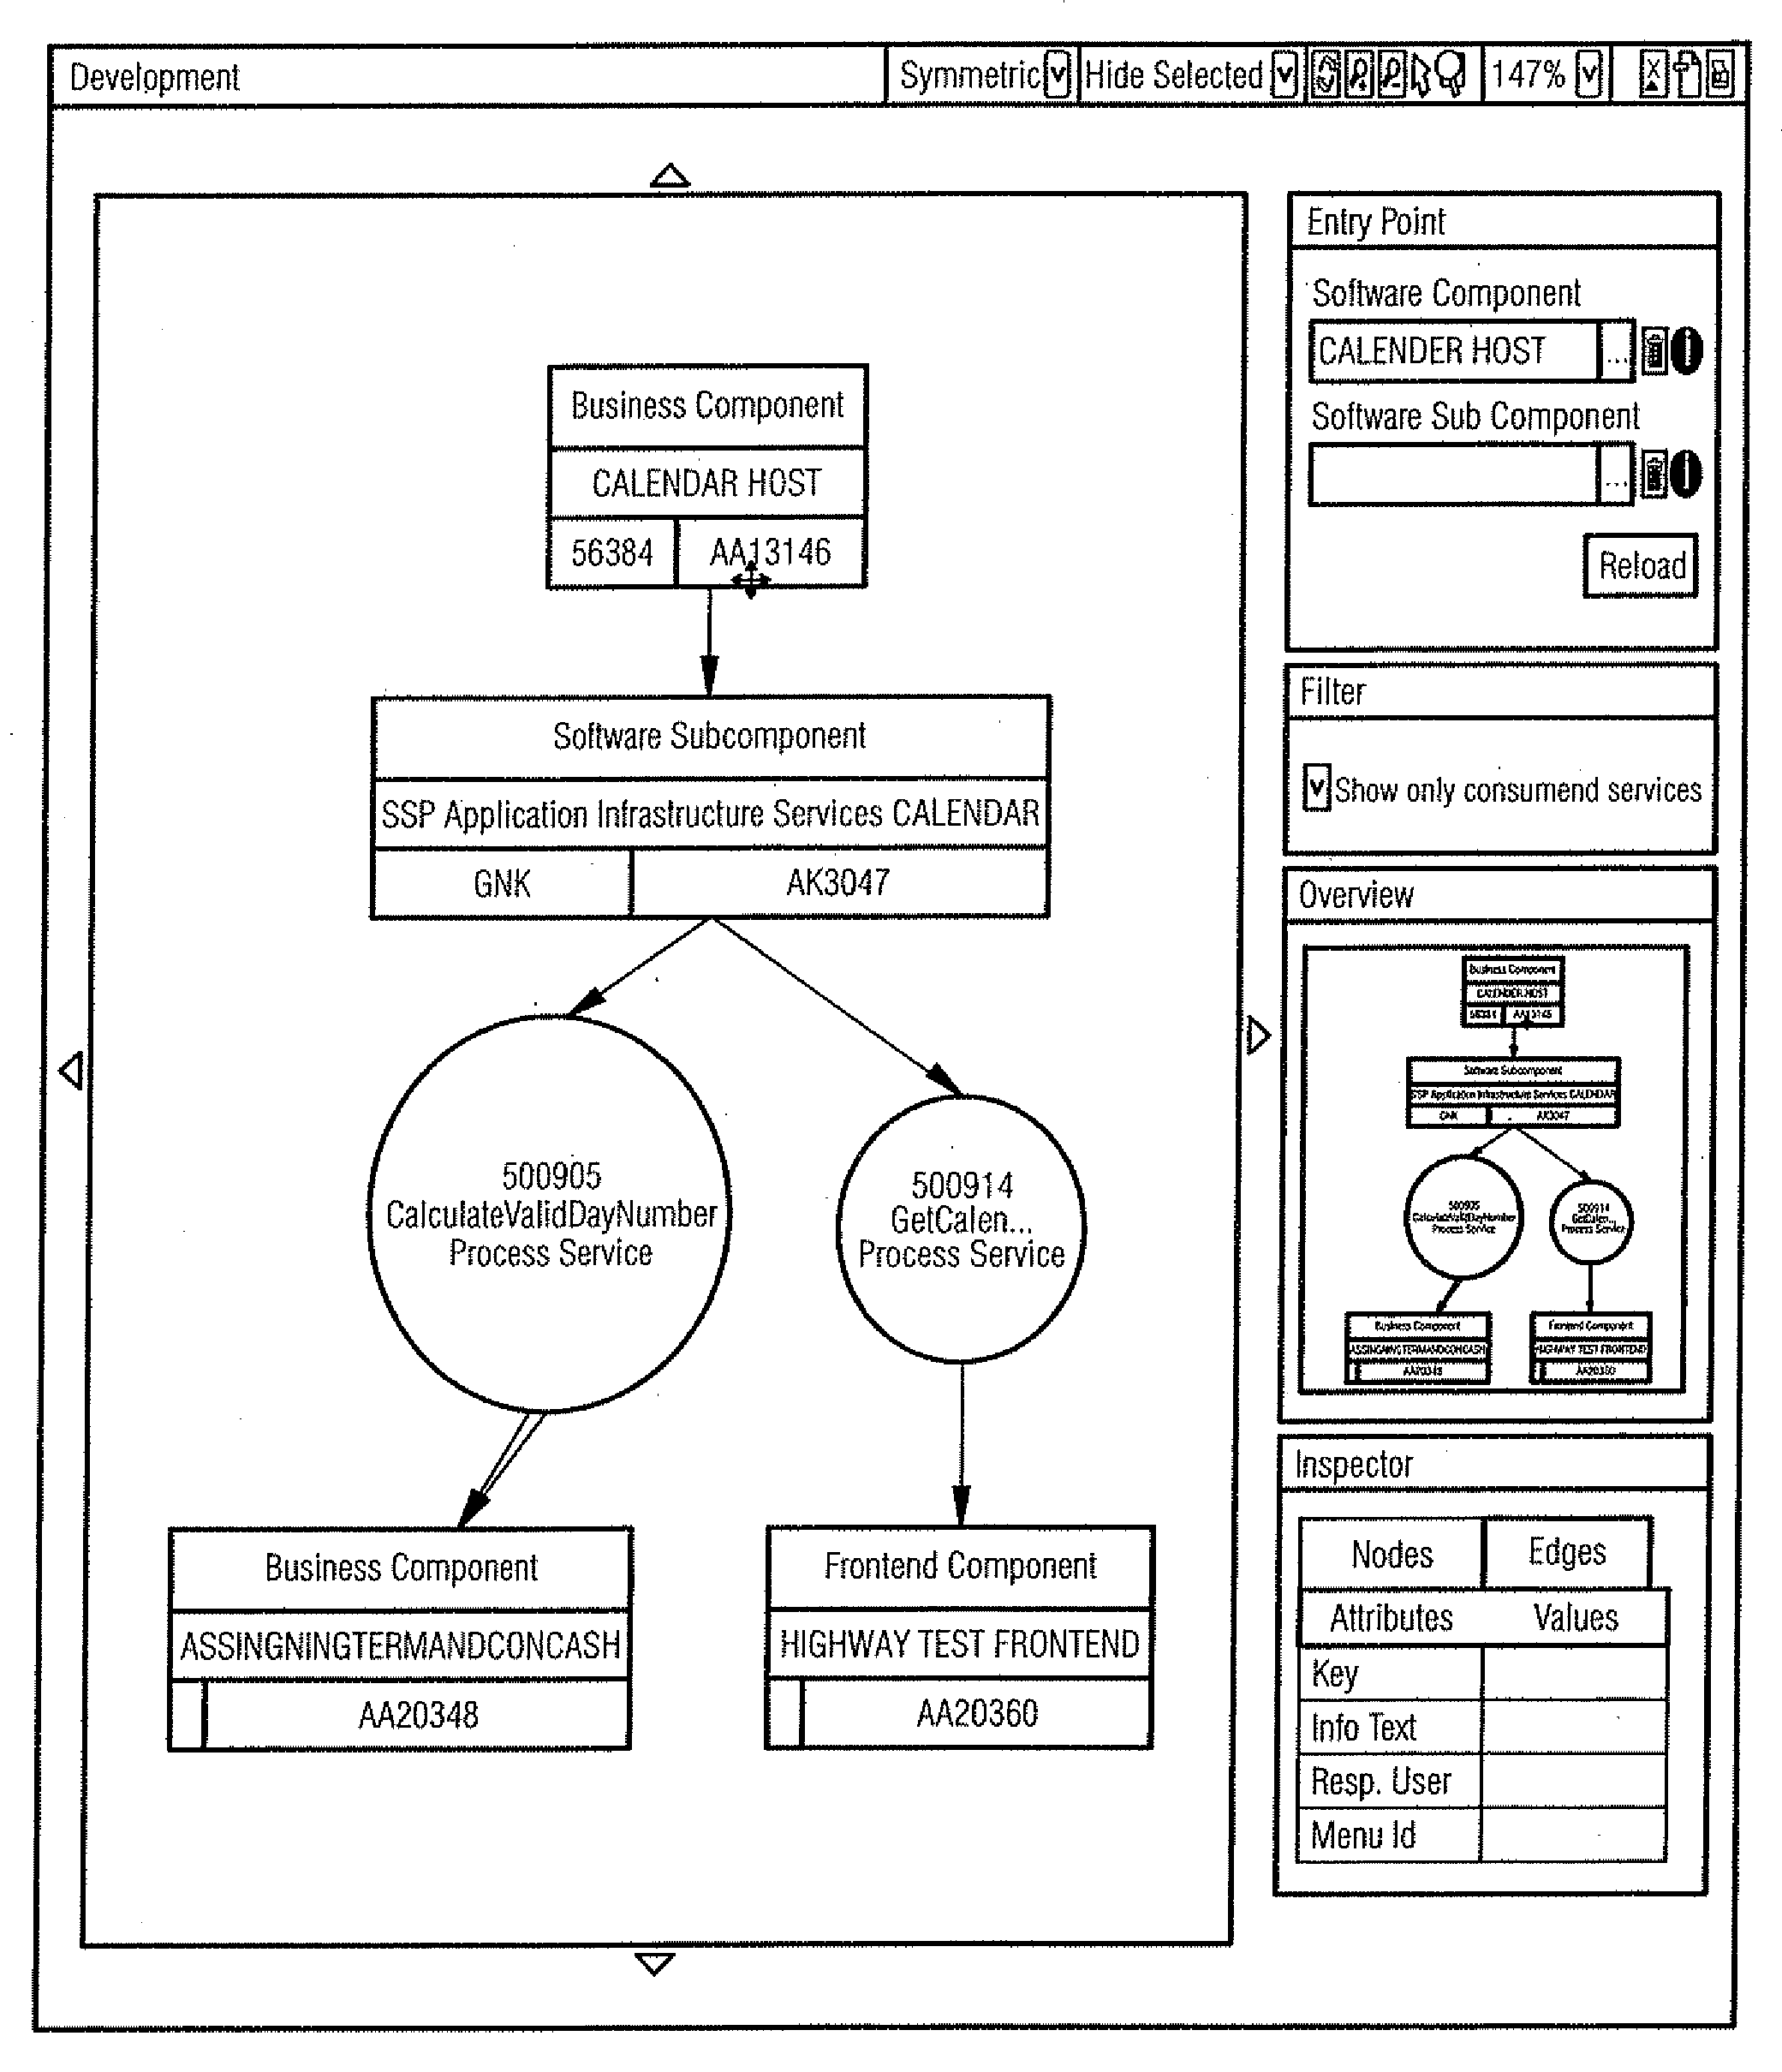 Computer-implemented system for analysis, administration, control, management and monitoring of a complex hardware/software architecture